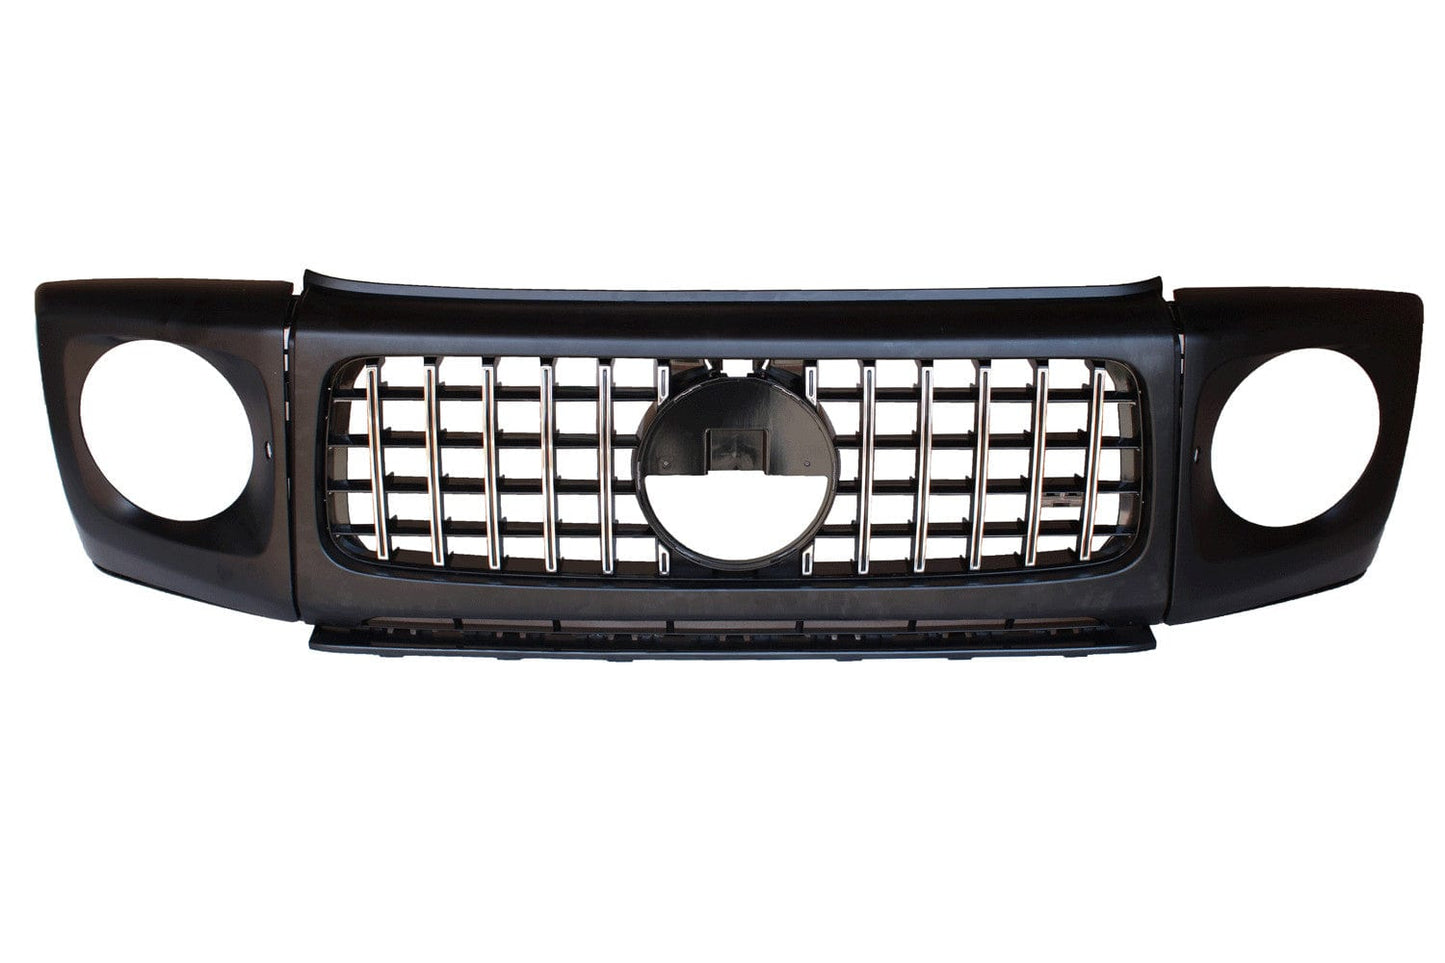 Grill compatible with Mercedes G class W463 with headlight covers gloss black chrome